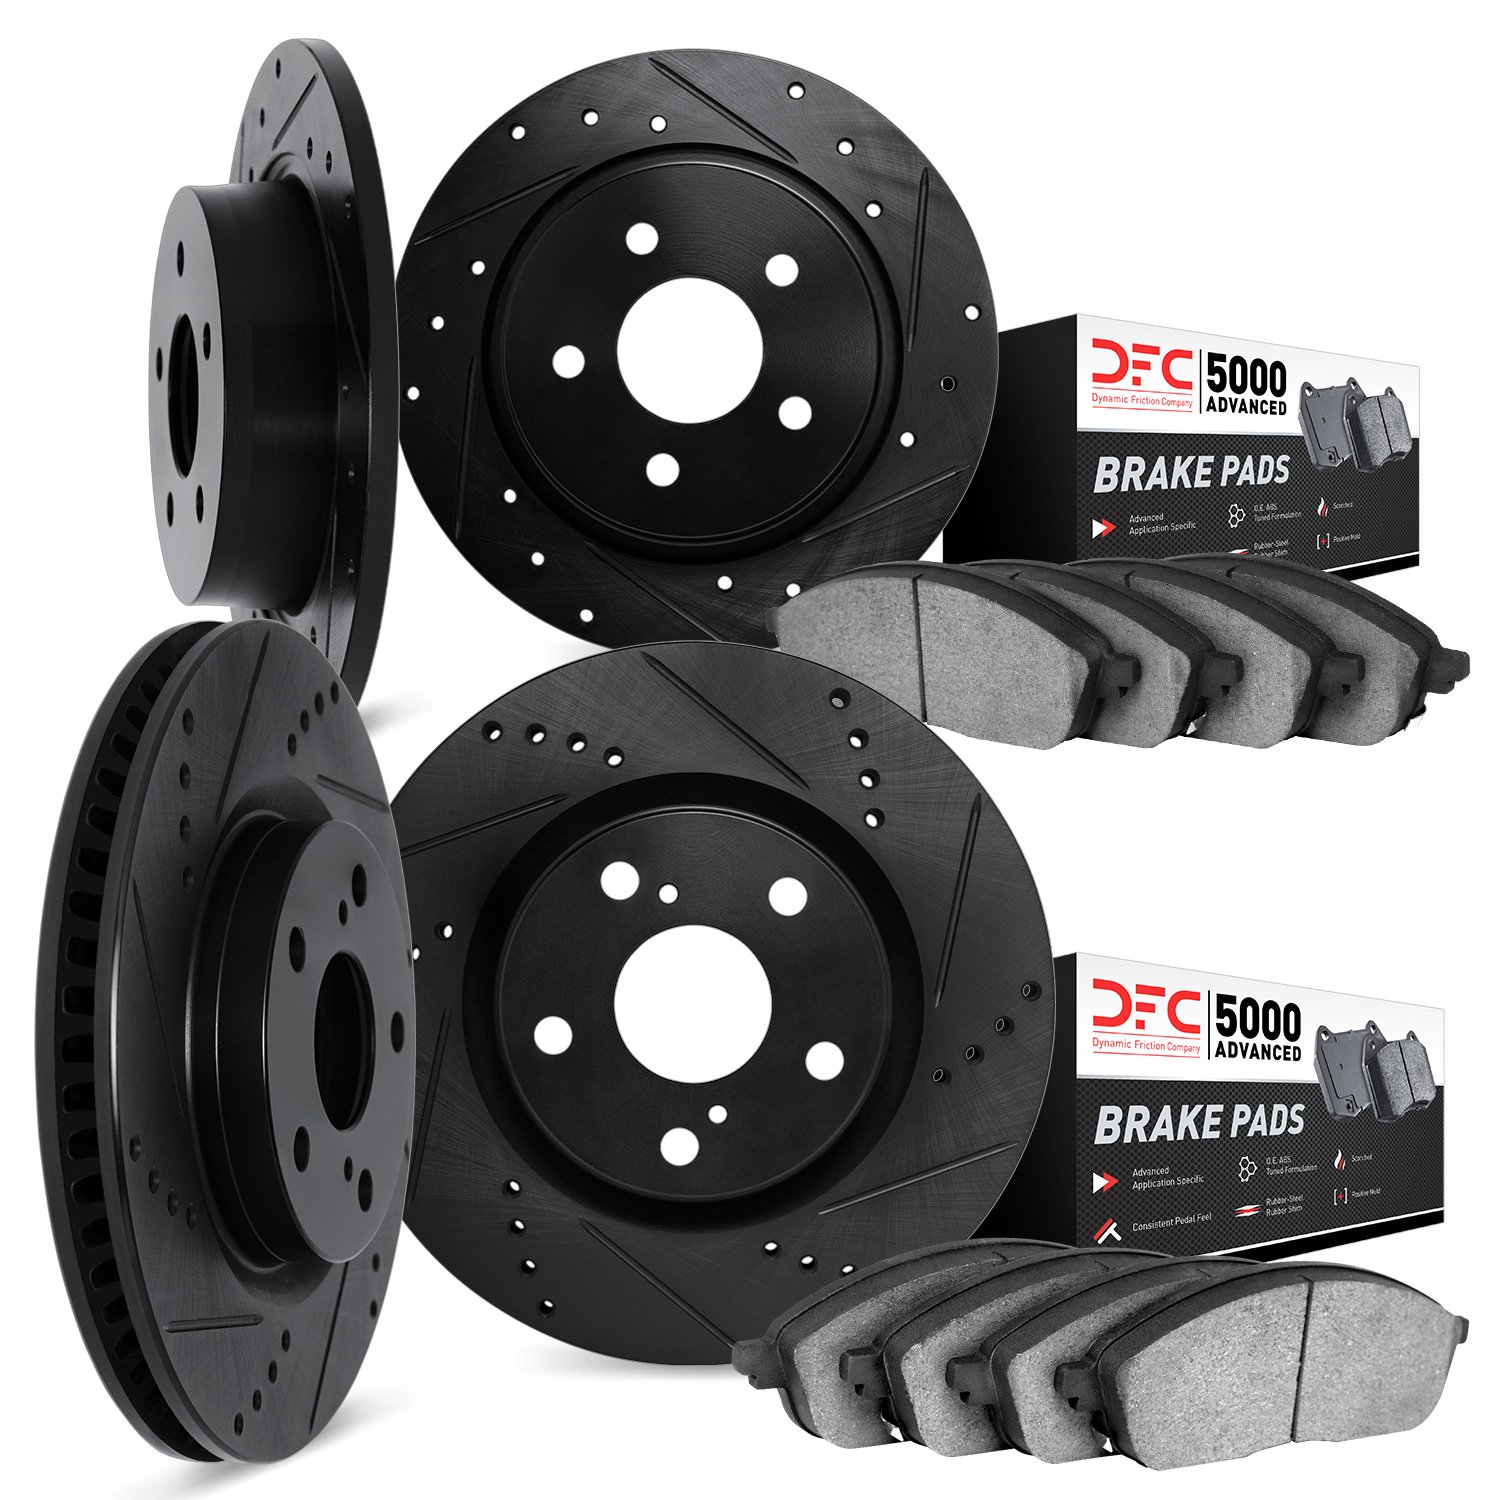 8504-72048 Drilled/Slotted Brake Rotors w/5000 Advanced Brake Pads Kit [Black], 2004-2012 Mitsubishi, Position: Front and Rear